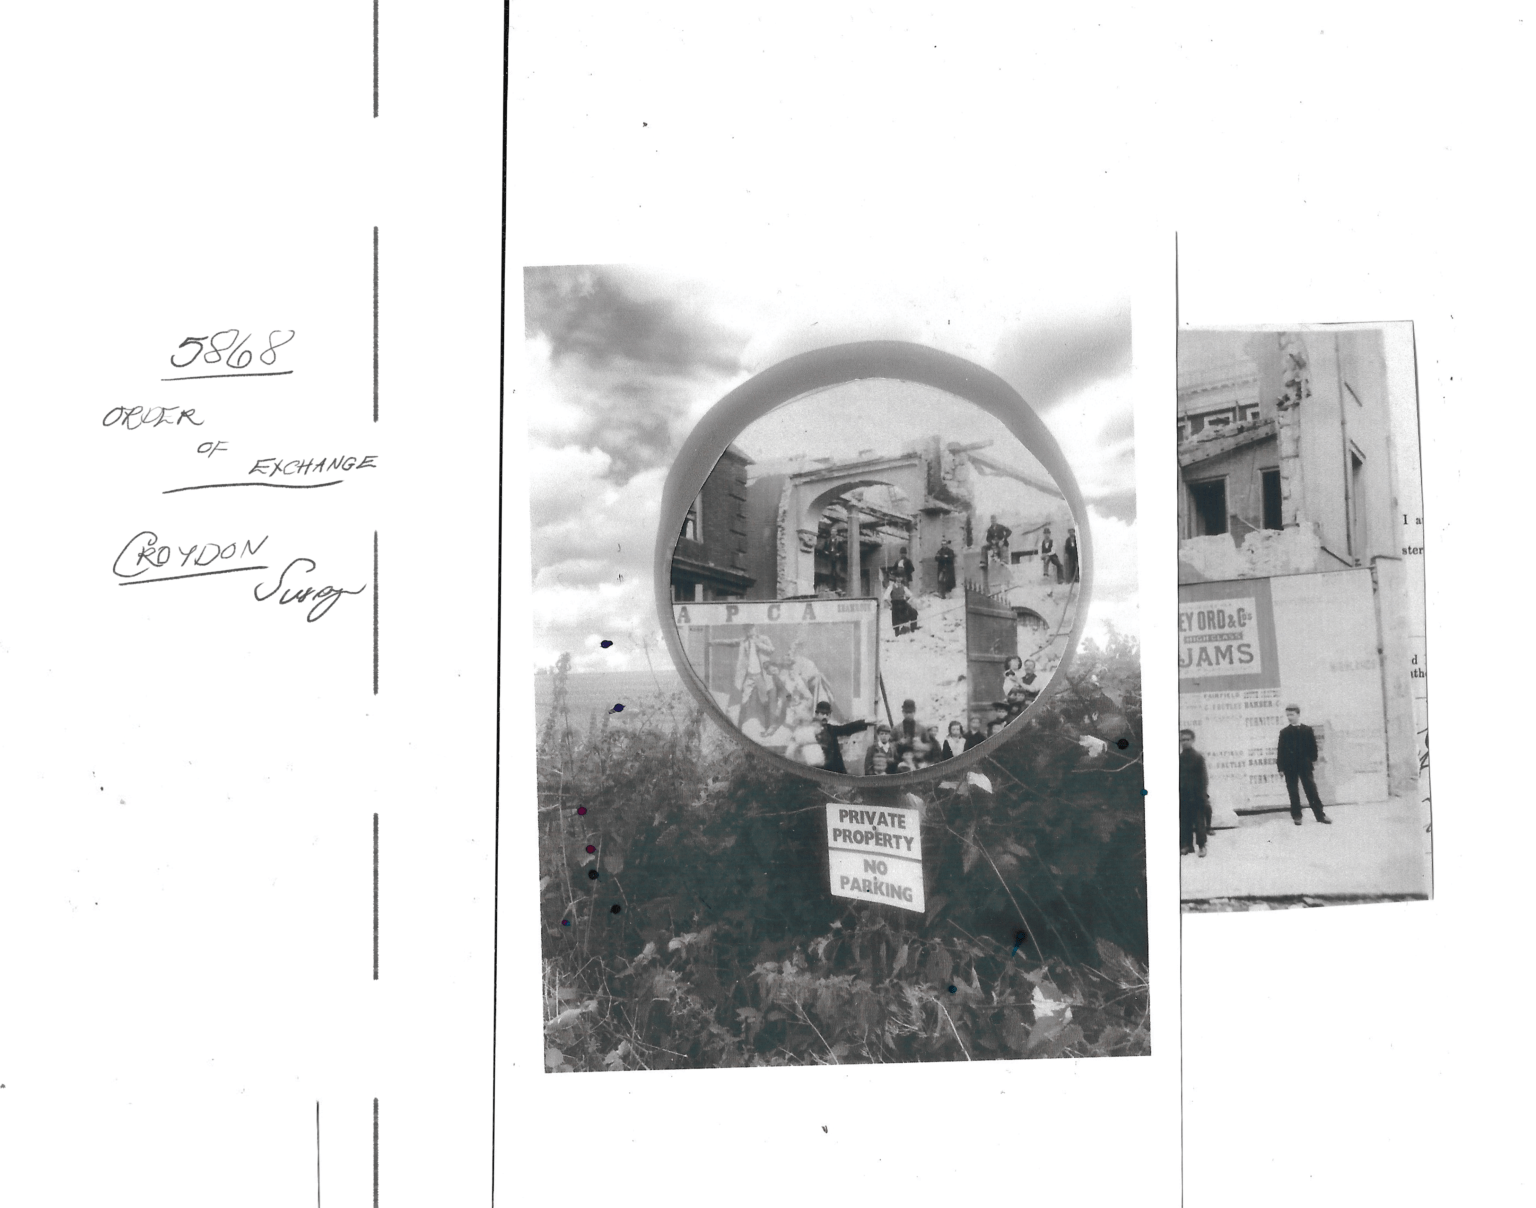 two black and white photographs of people situated around buildings. on the left "5868 - order of exchange" is written